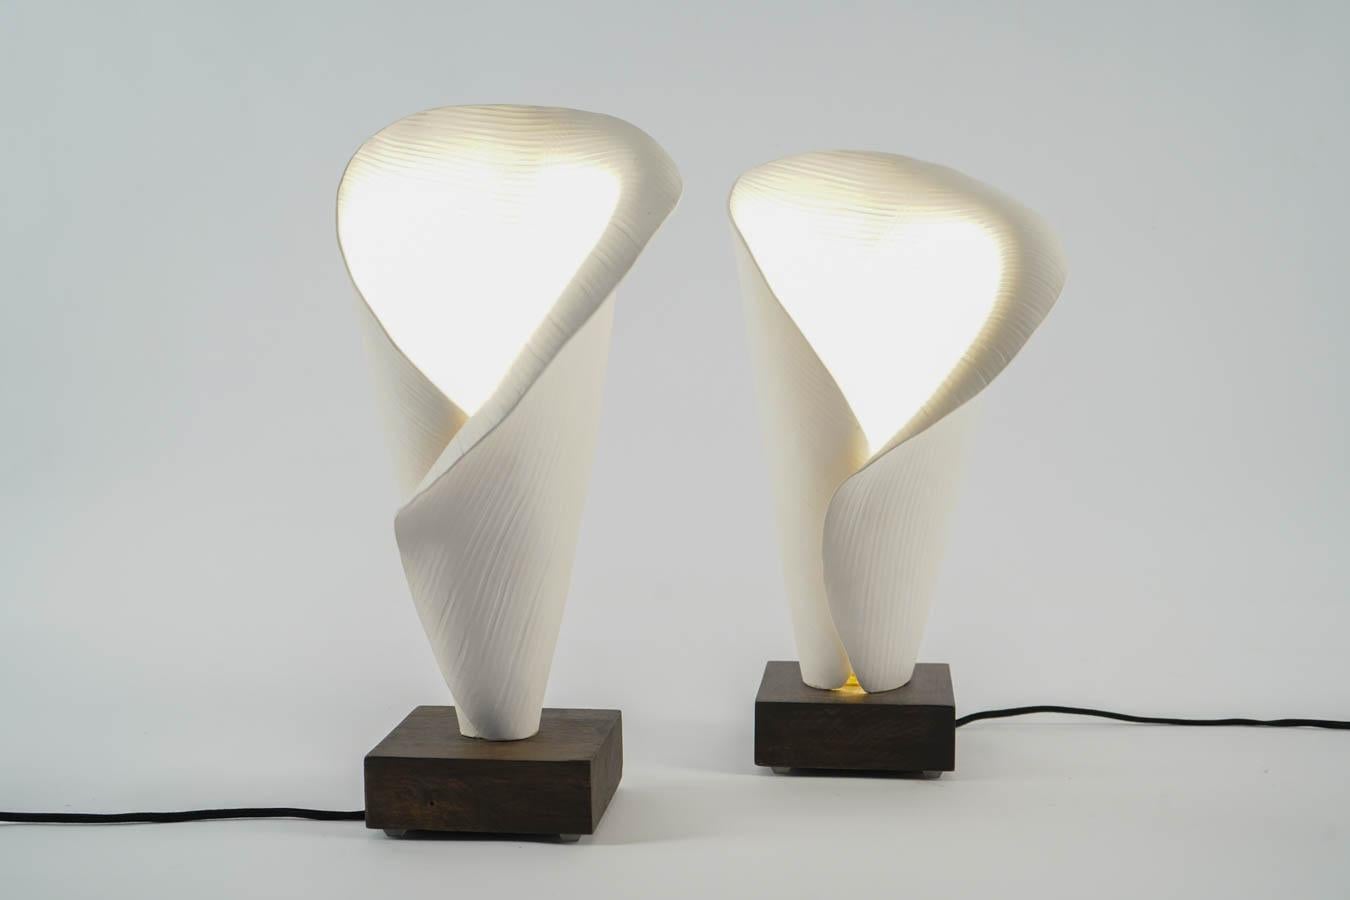 Pair of table lamps 24'', white ceramic lamp made by hand mounted on solid oak, art modern.